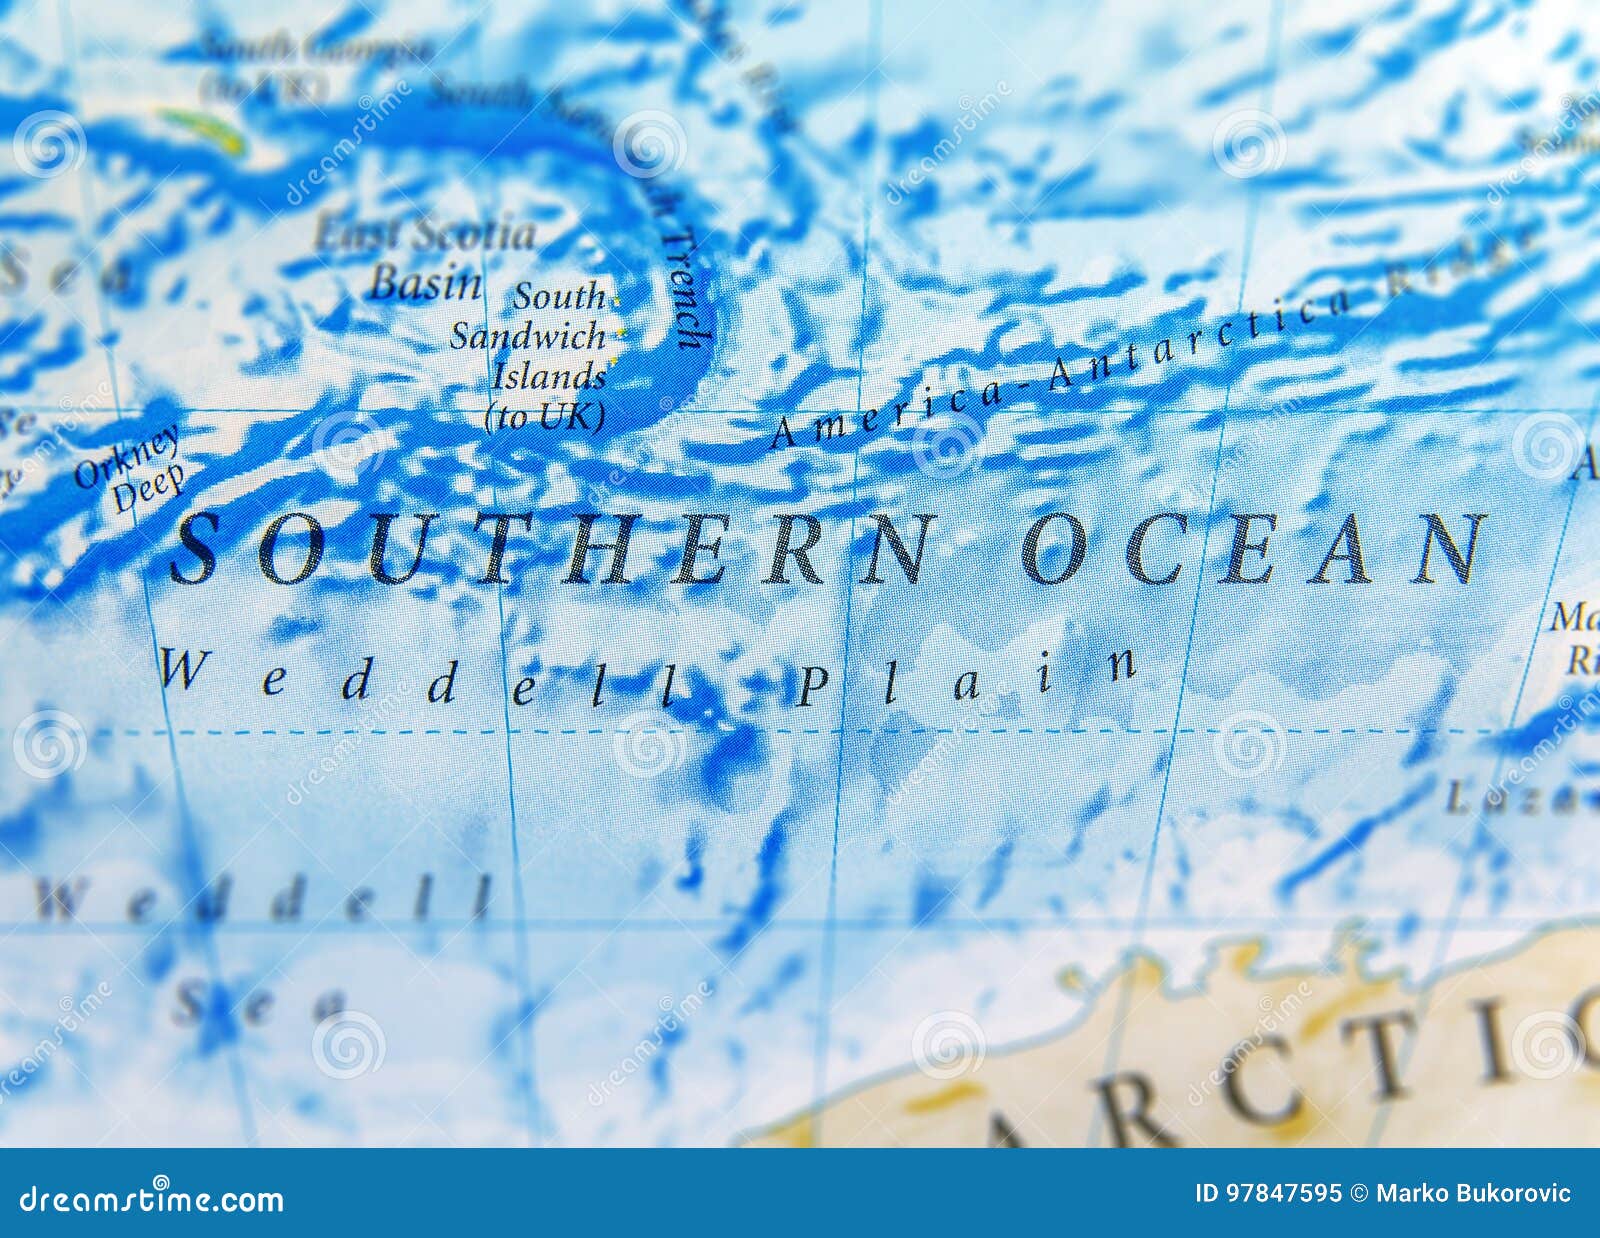 geographic map of souther ocean close